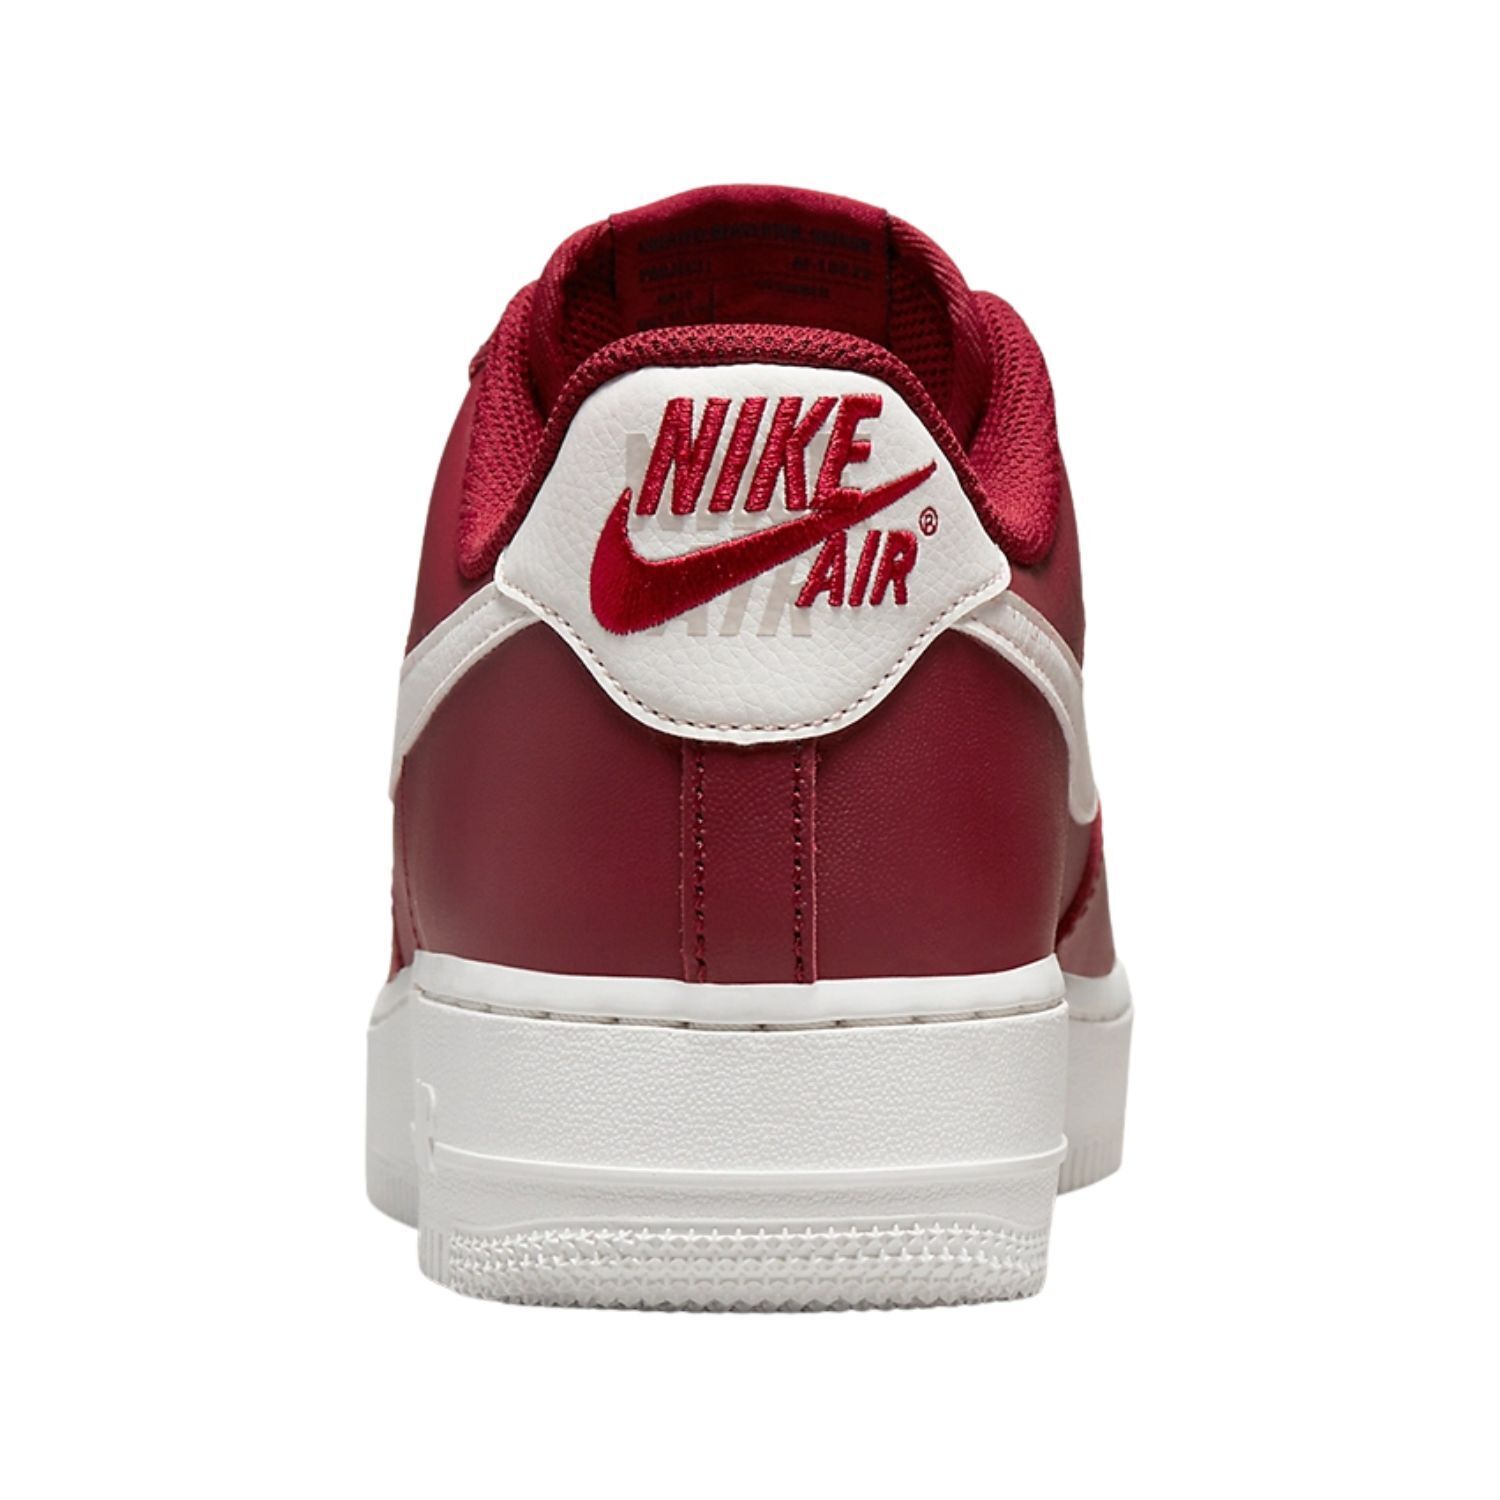 Nike Men's Nike Air Force 1 07 PRM "Join Forces" Team Rd/Sil-Gym Rd (DQ7664 600)